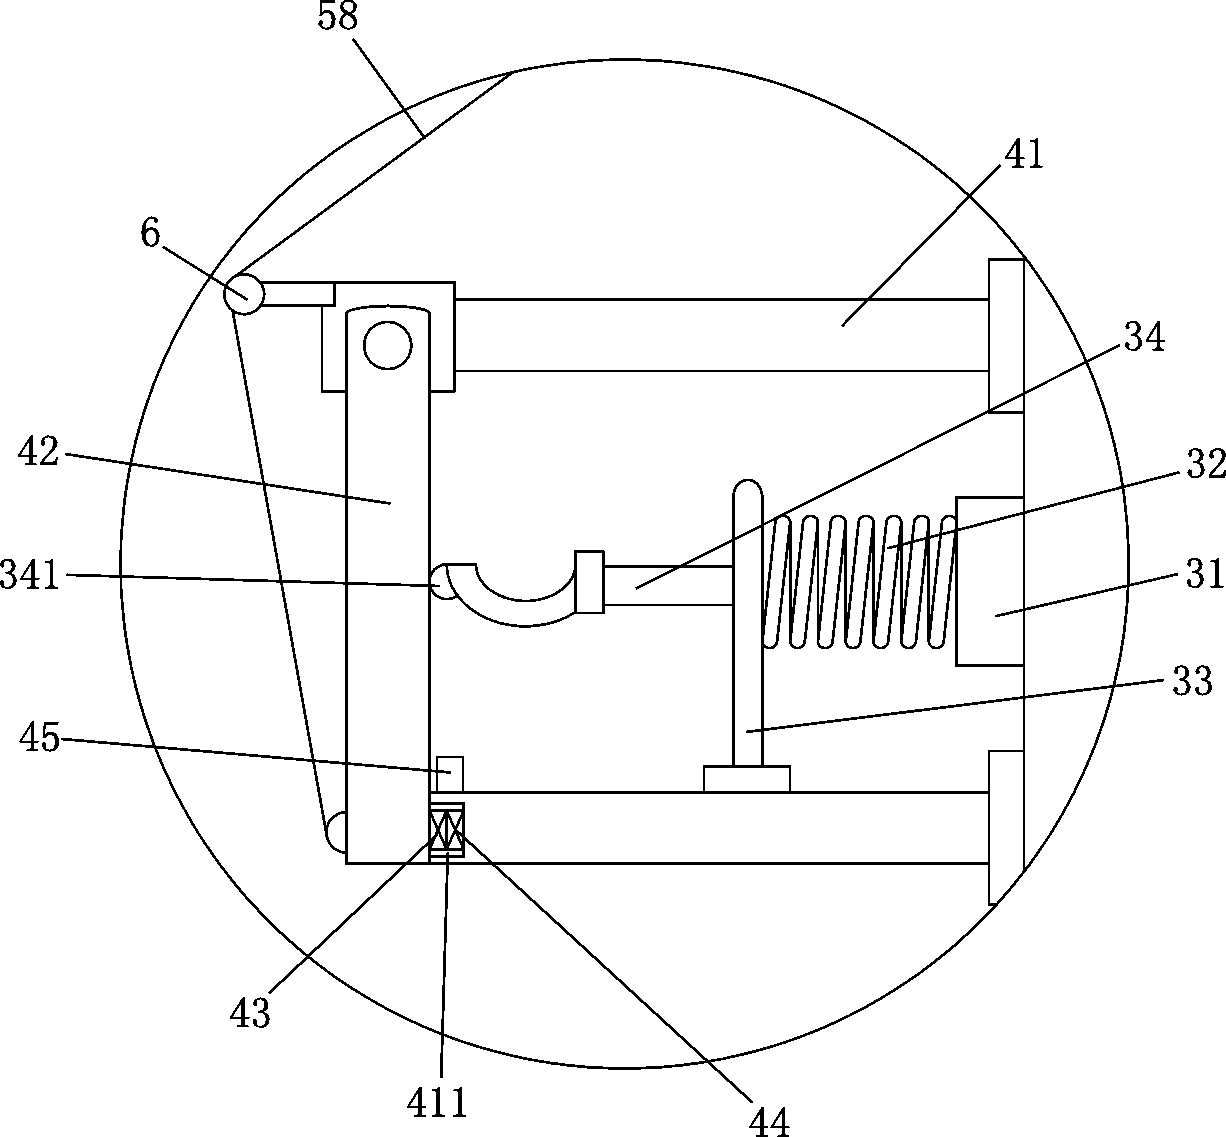 Hook structure capable of effectively utilizing resource